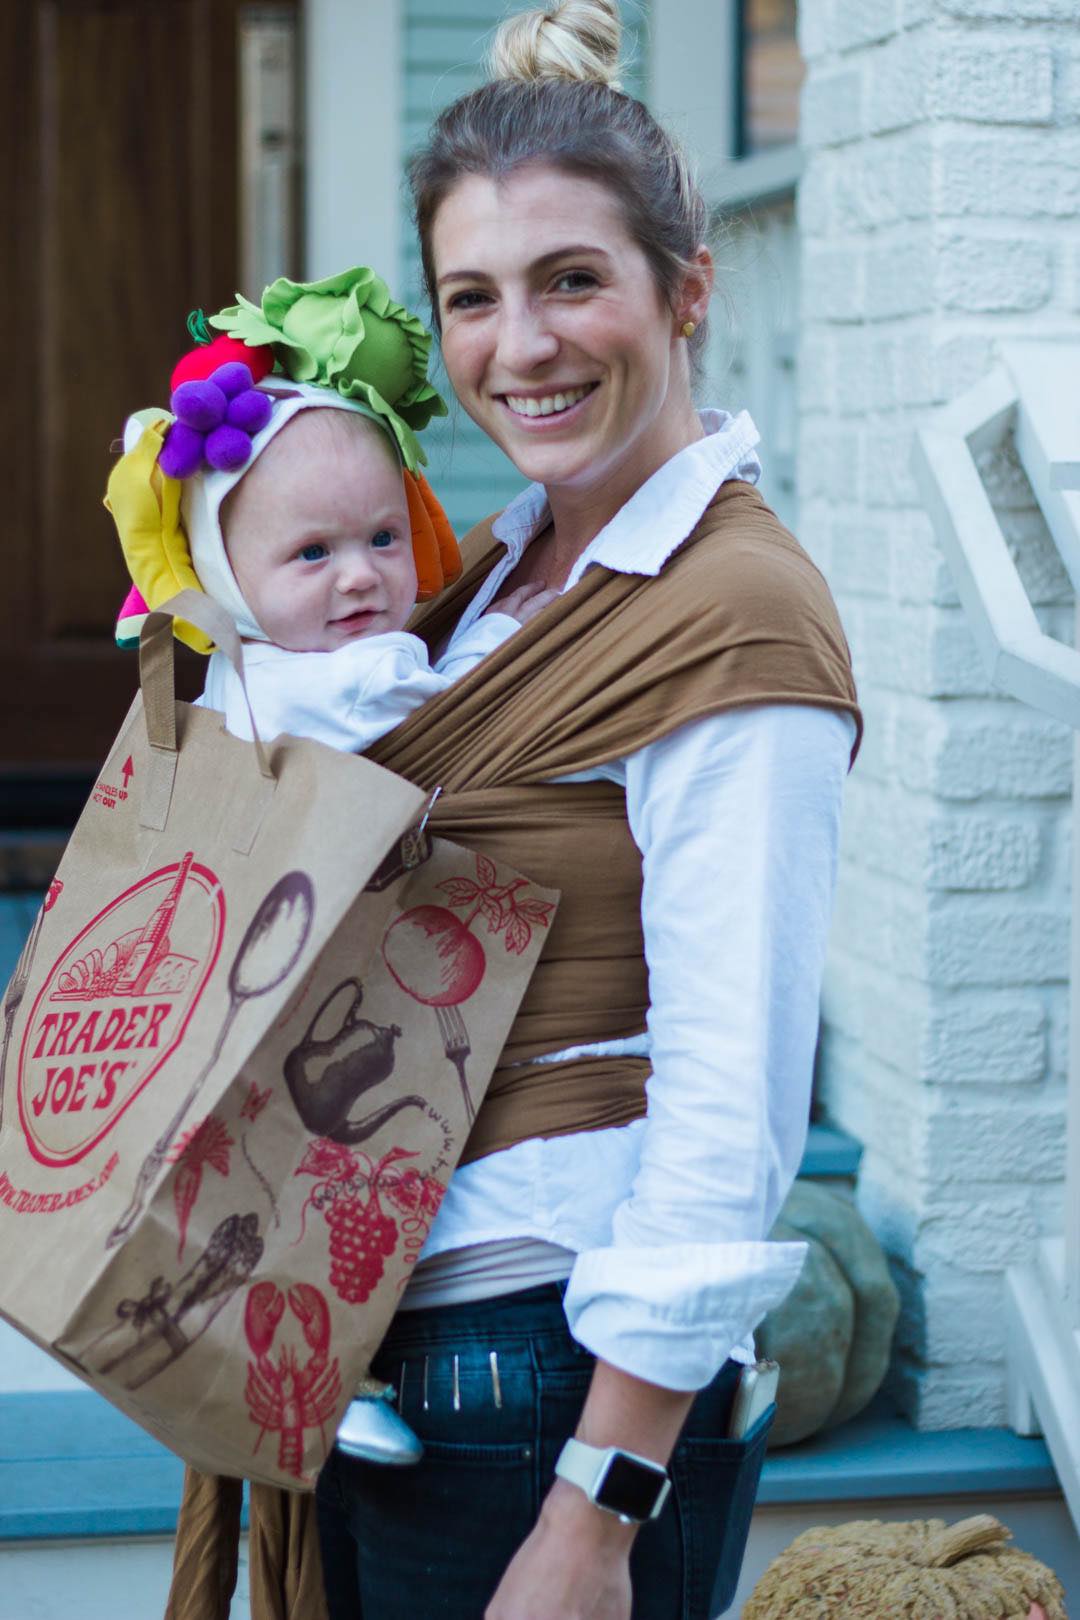 A baby dressed as Trader Joe's produce